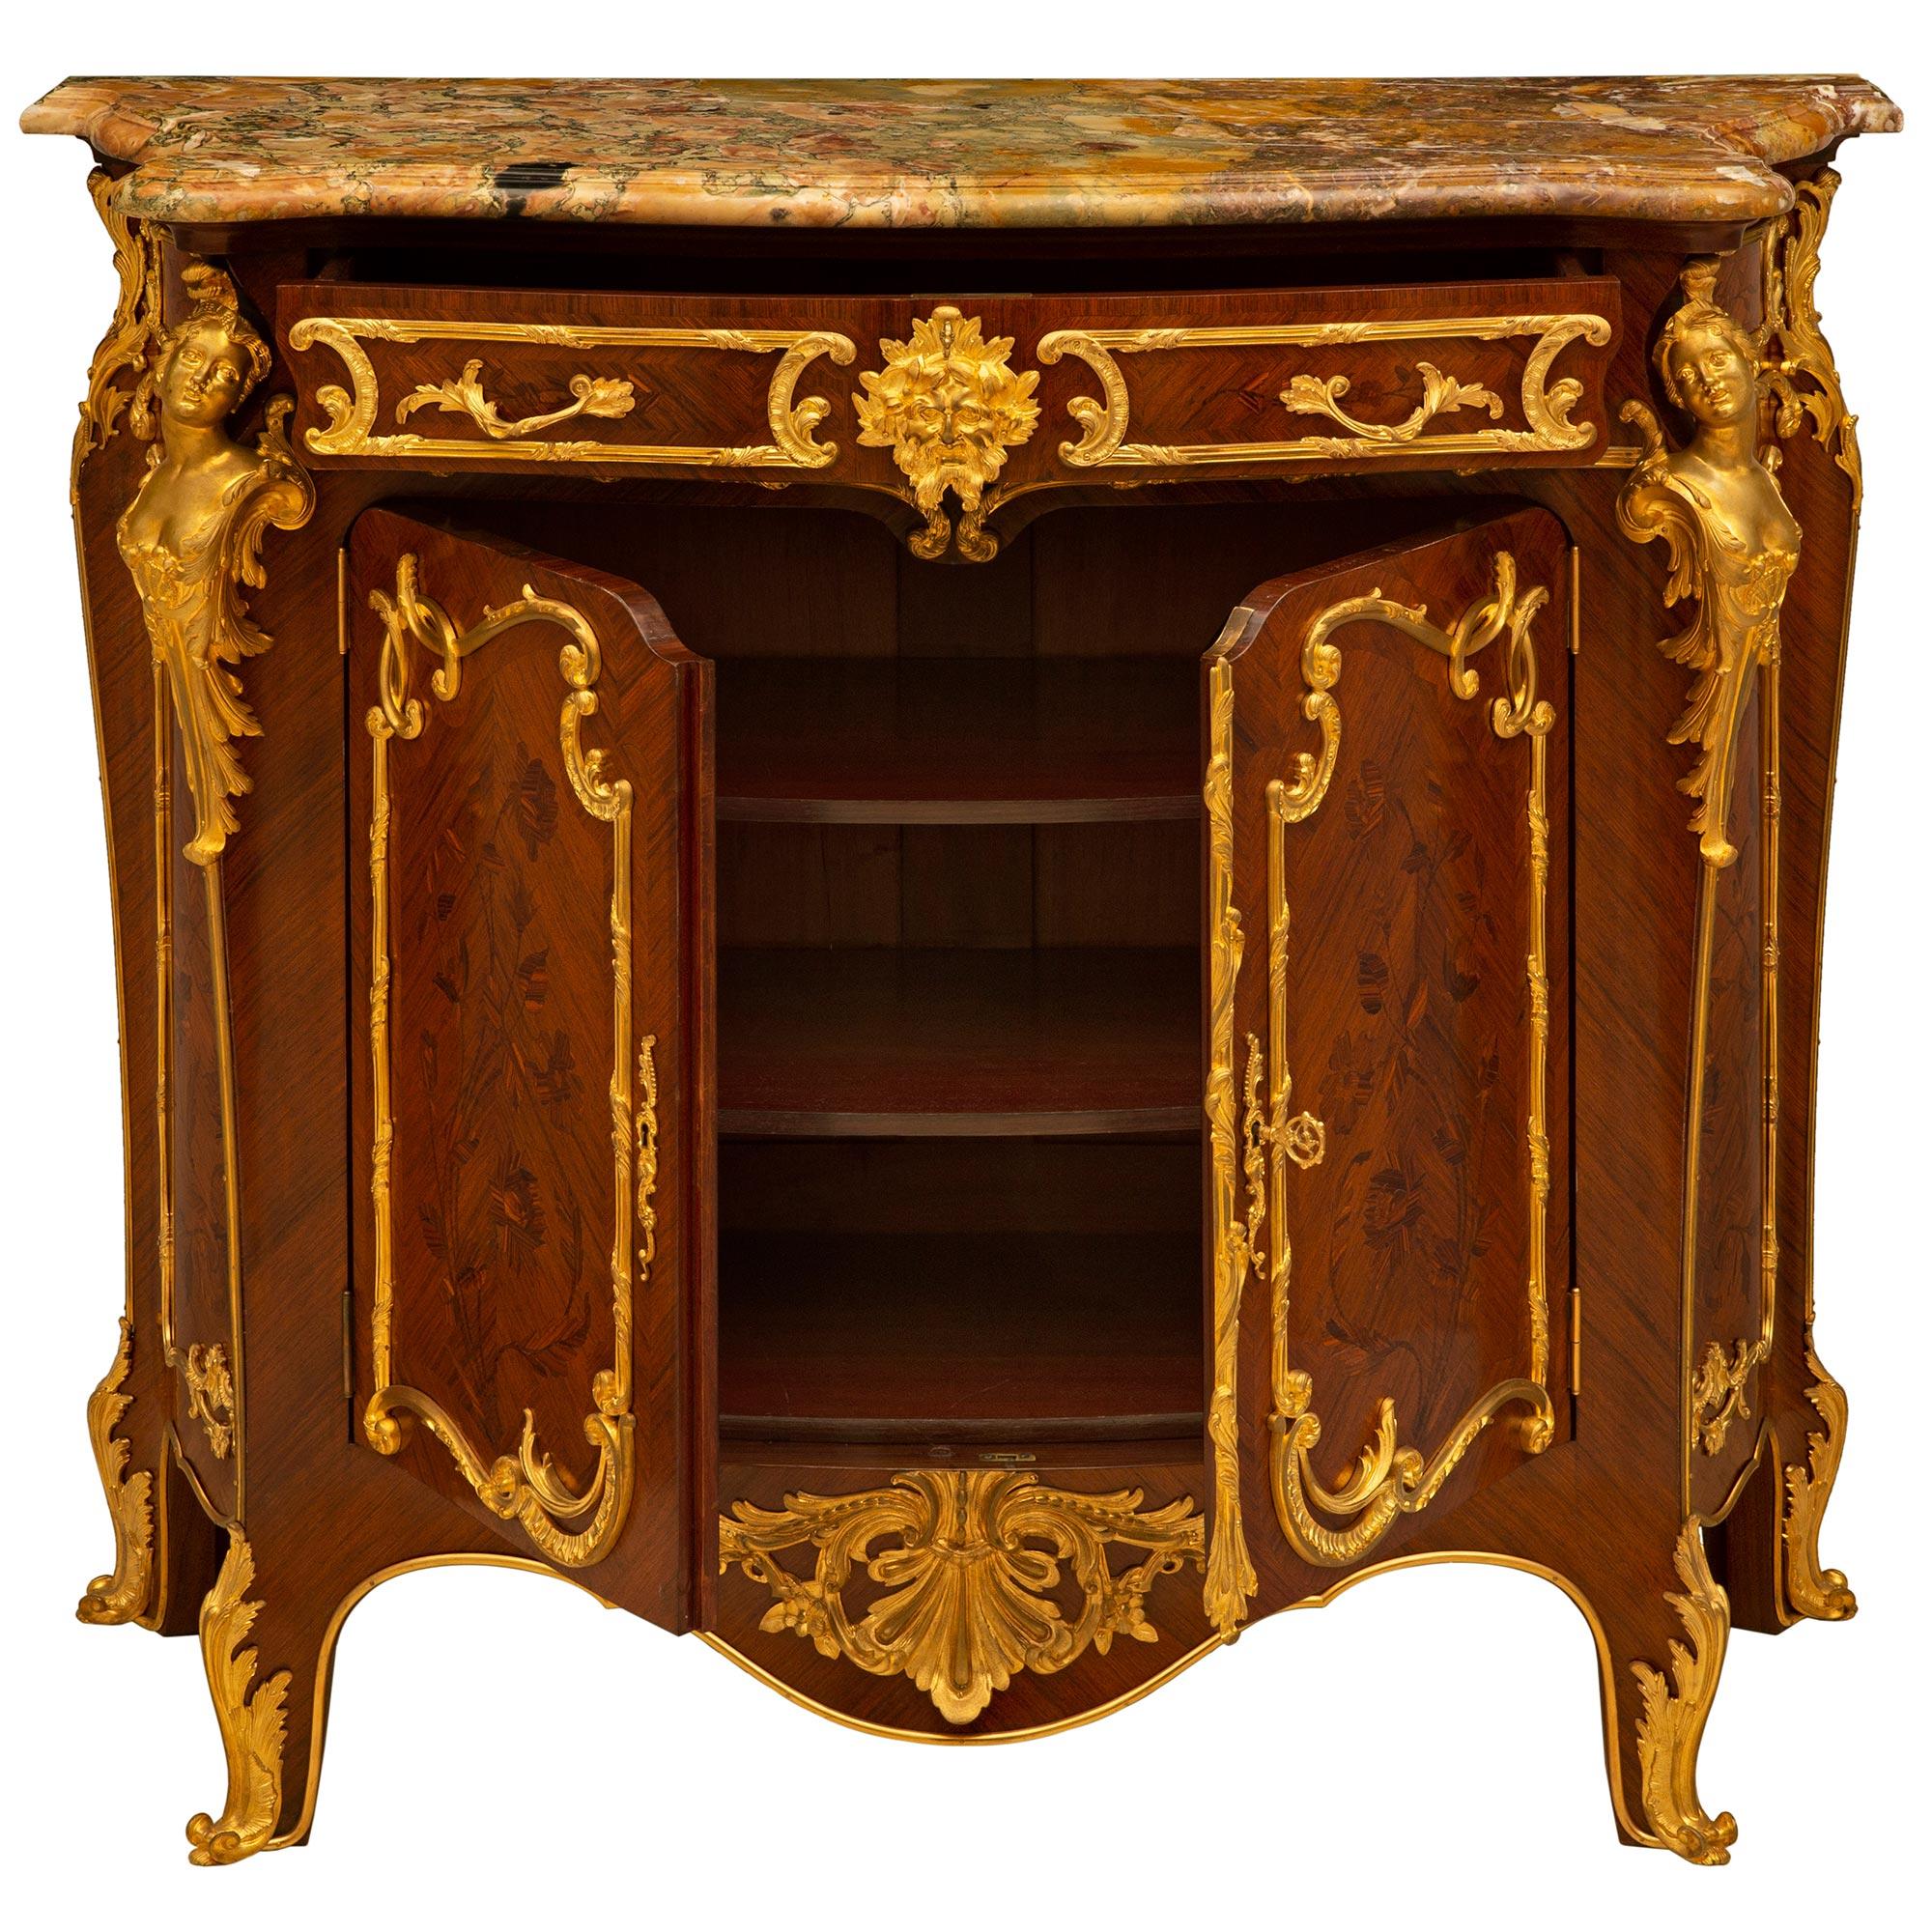 A sensational French 19th century Louis XV style tulipwood, kingwood and ormolu cabinet, attributed to Zweiner. The cabinet is raised by handsome scrolled legs with with rich acanthus leaf sabots and a fine ormolu chute which extends up to most